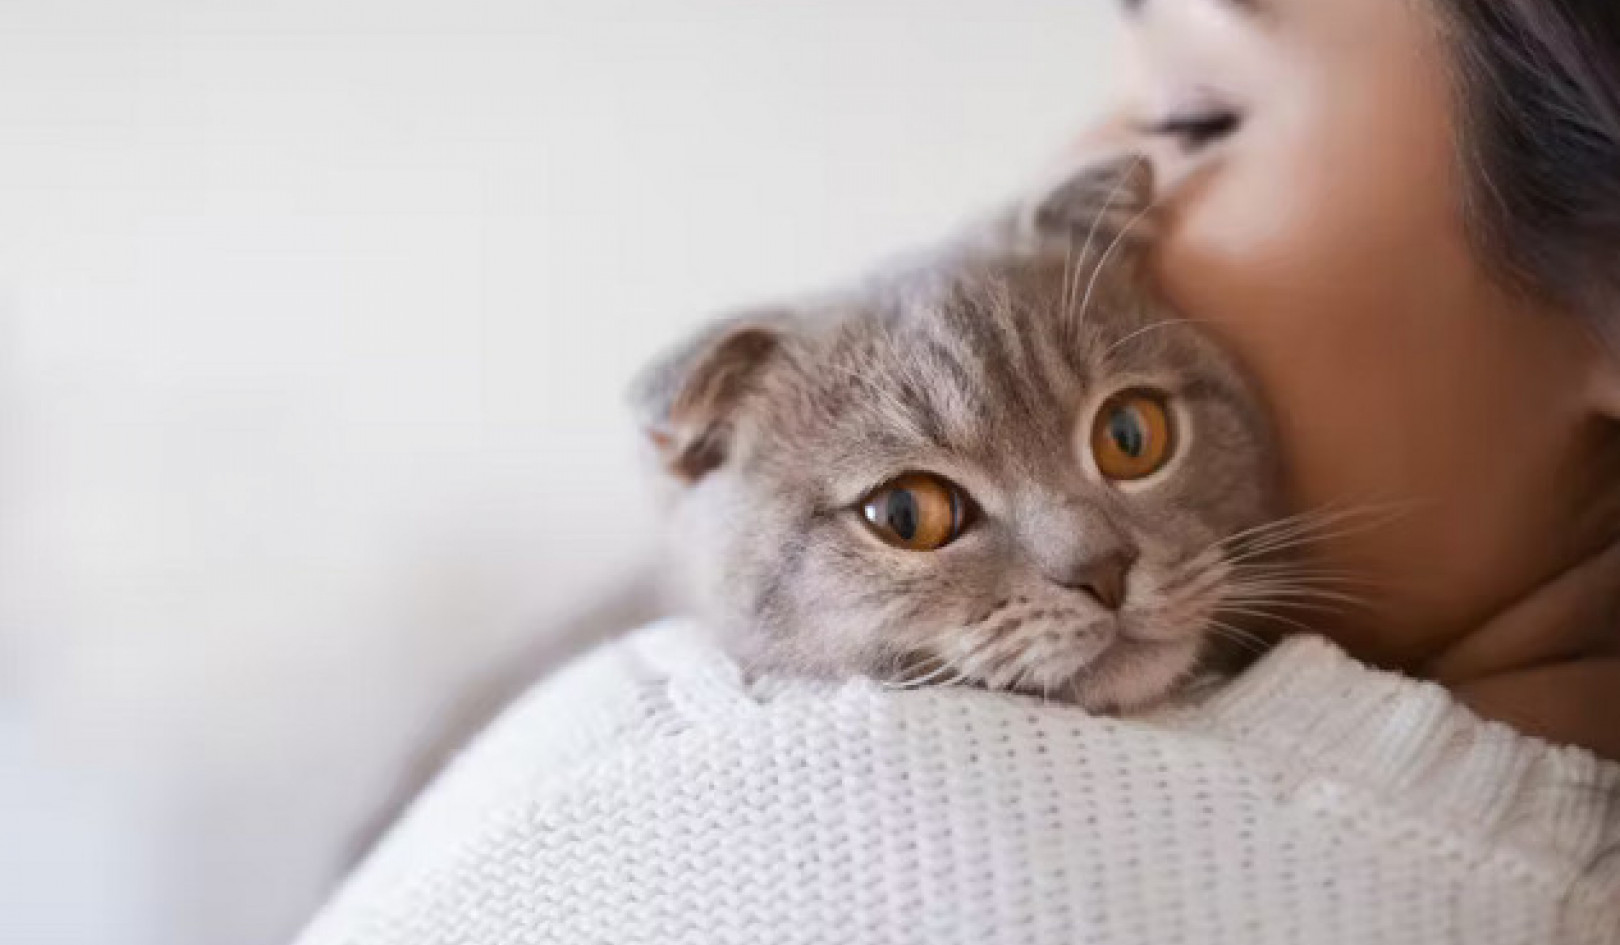 Why Cats Meow at Humans More Than Each Other